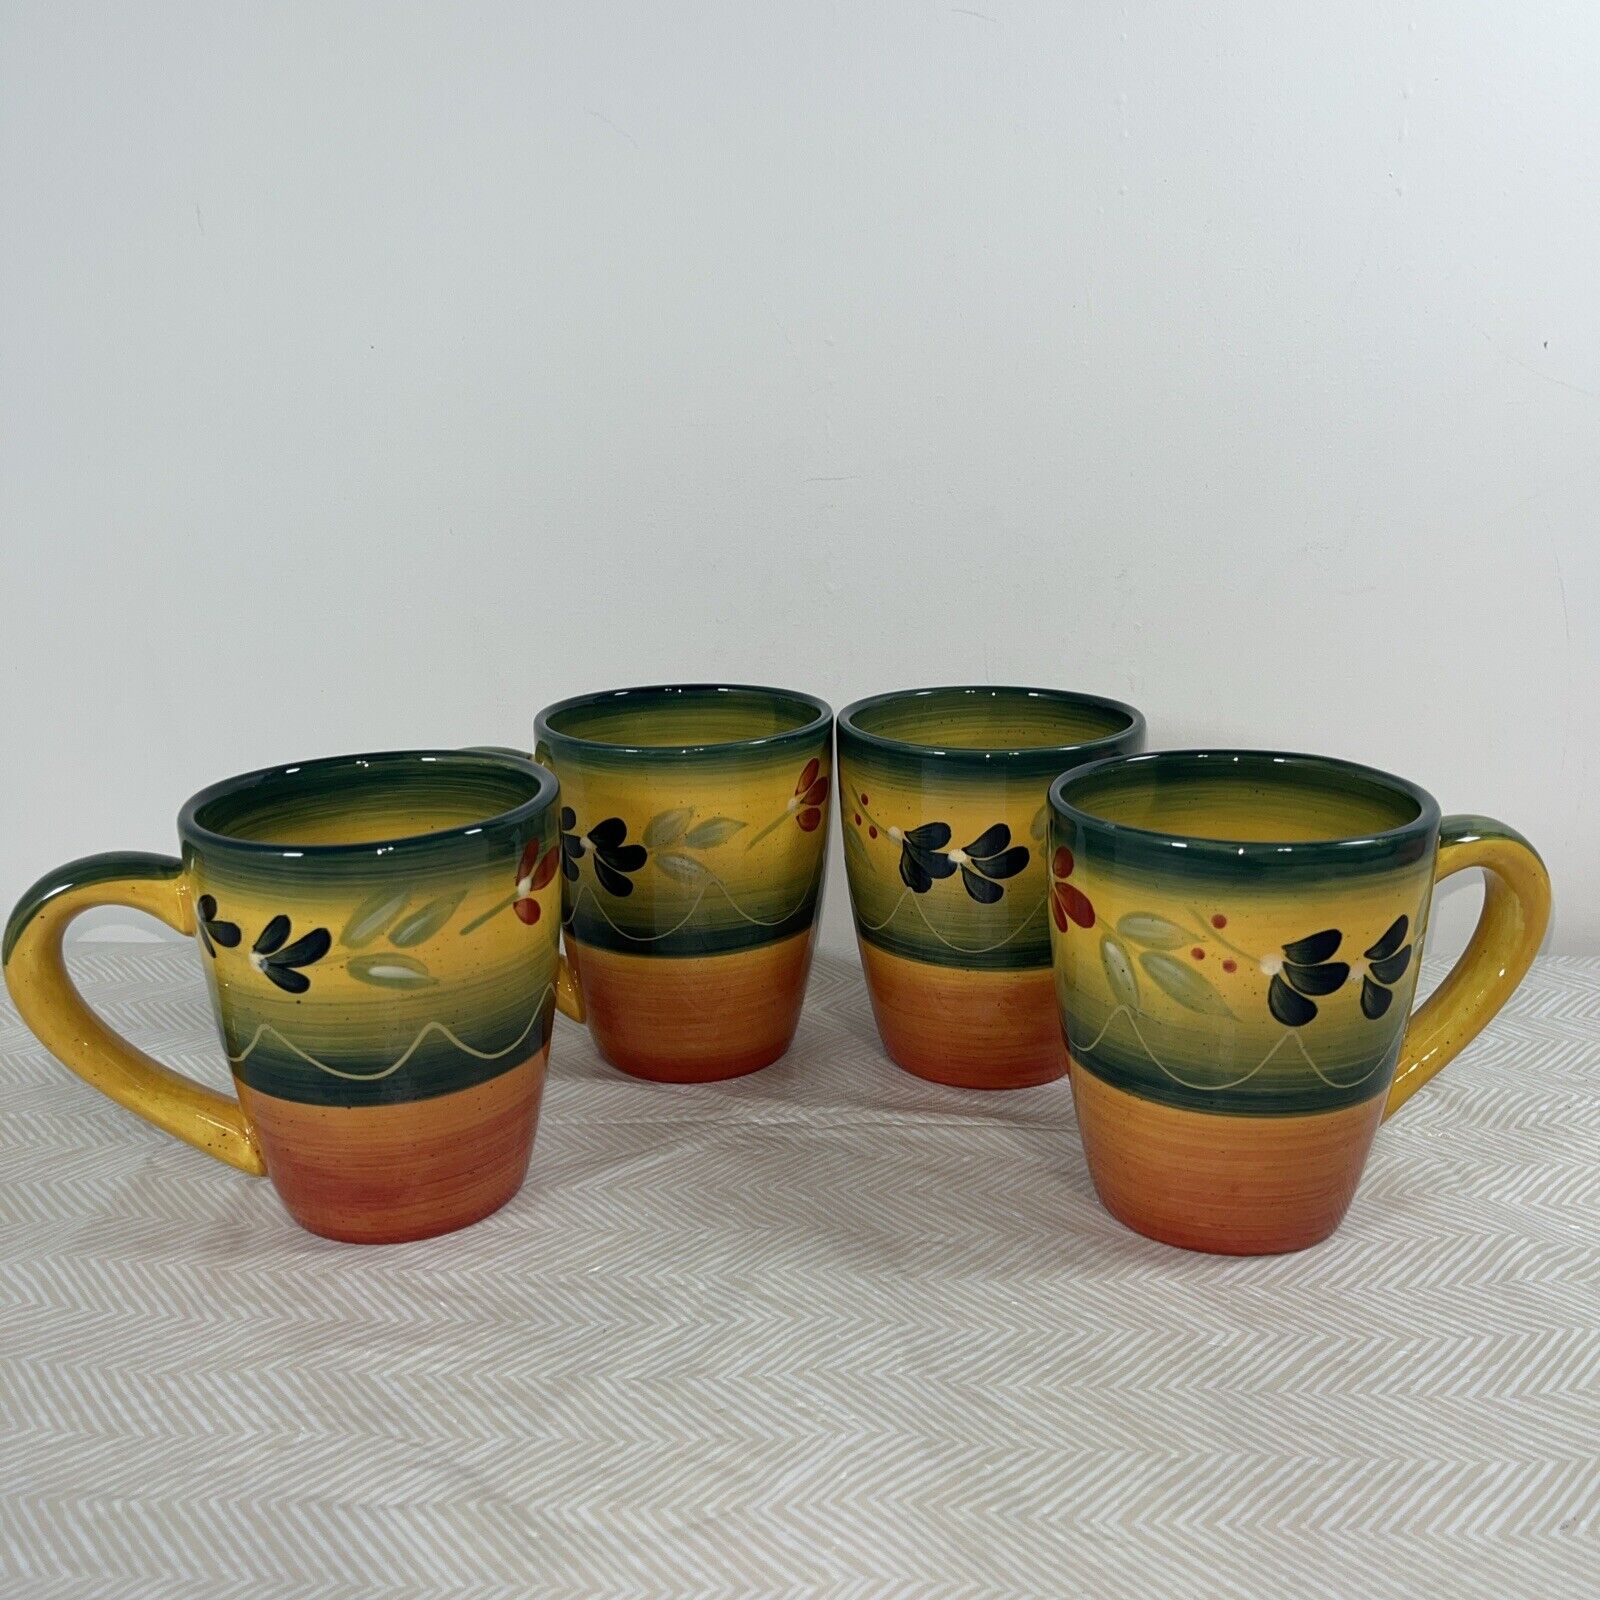 TABLETOPS GALLERY La Province Hand Crafted, Painted Set Of 4 Ceramic Coffee Mugs